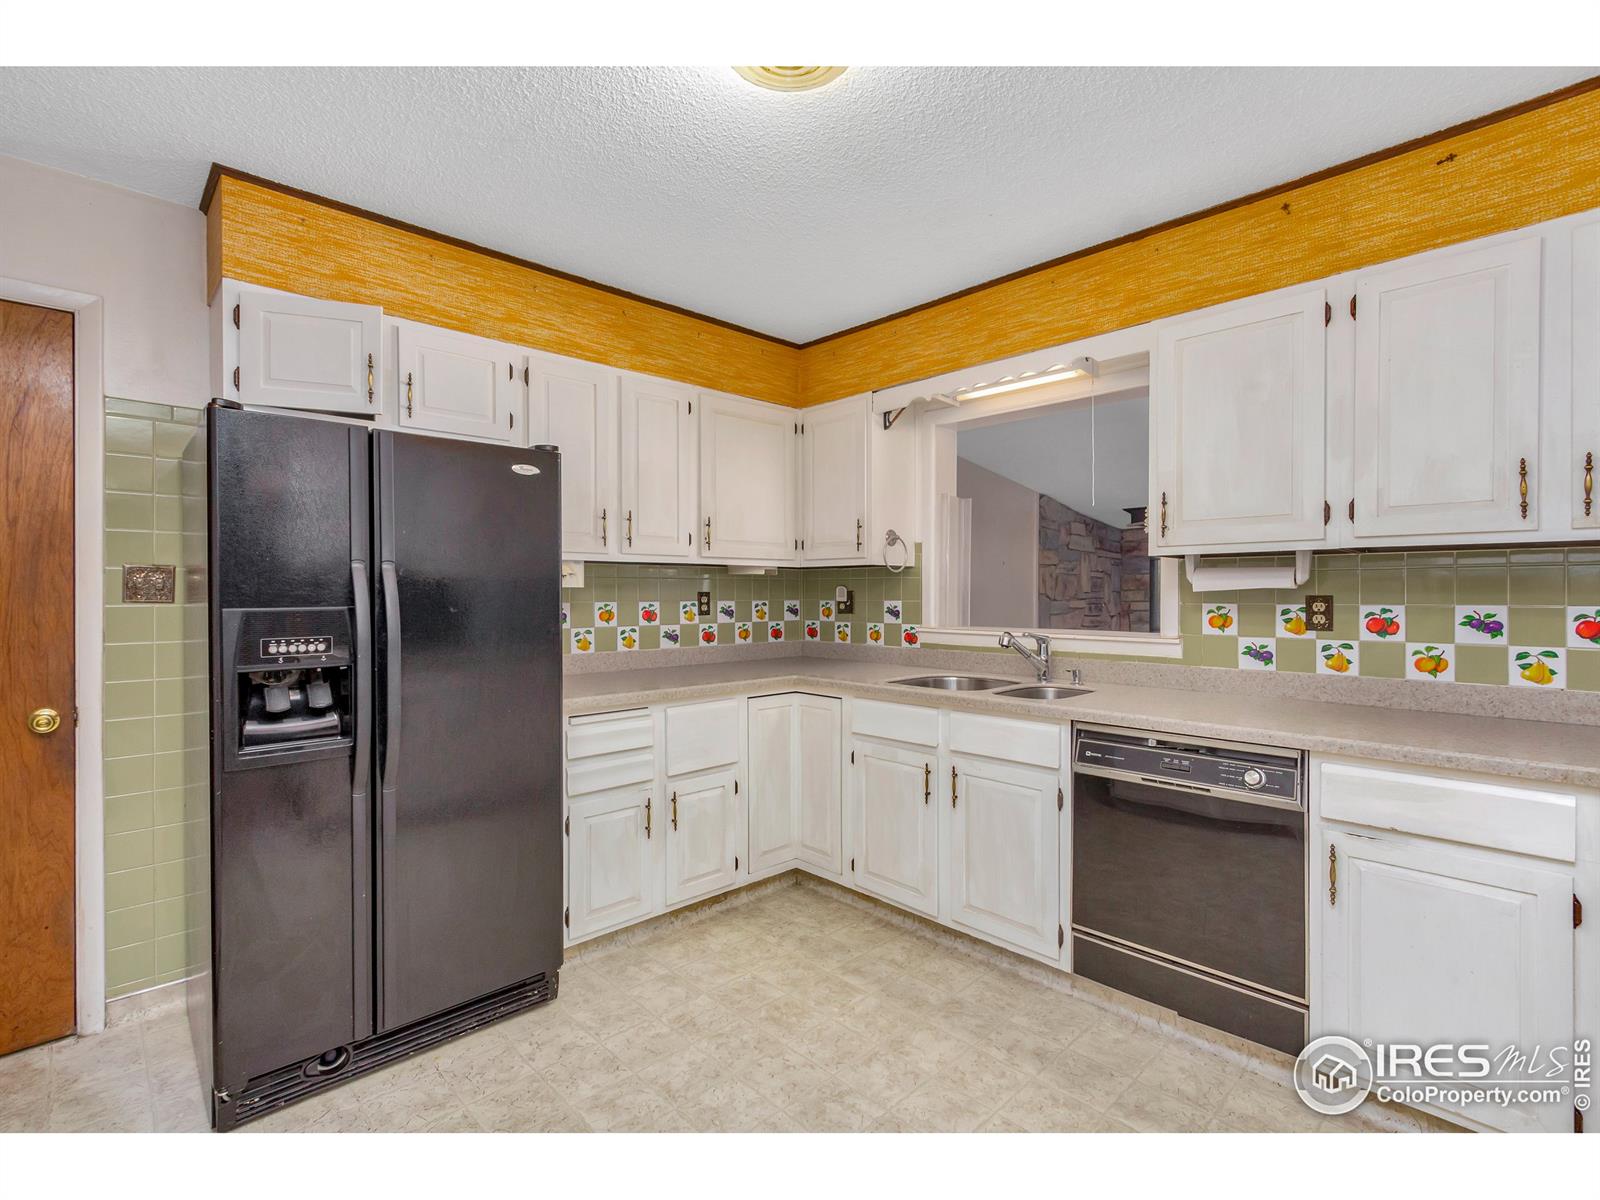 16511 Highway 392, Greeley, CO